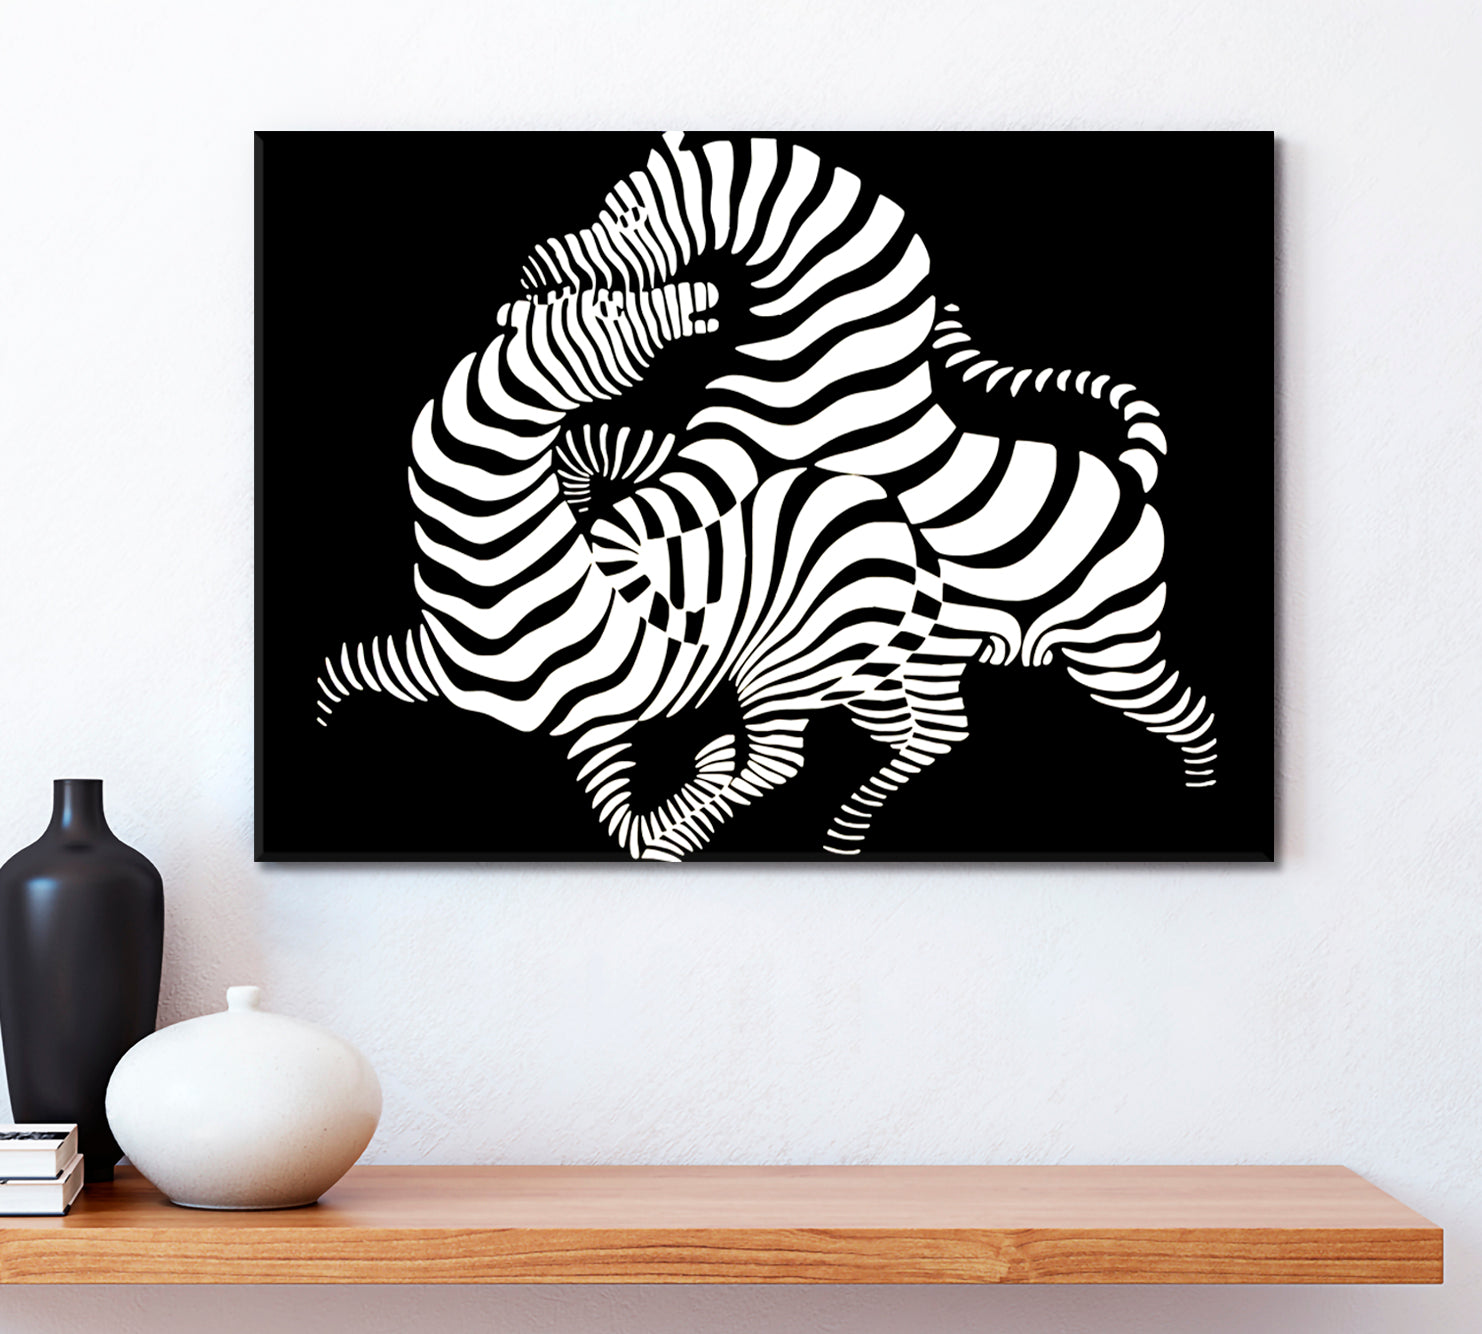 IN LOVE Twisted Zebras Vasarely Style Tricky Optical Illusion Op-art Contemporary Art Artesty   